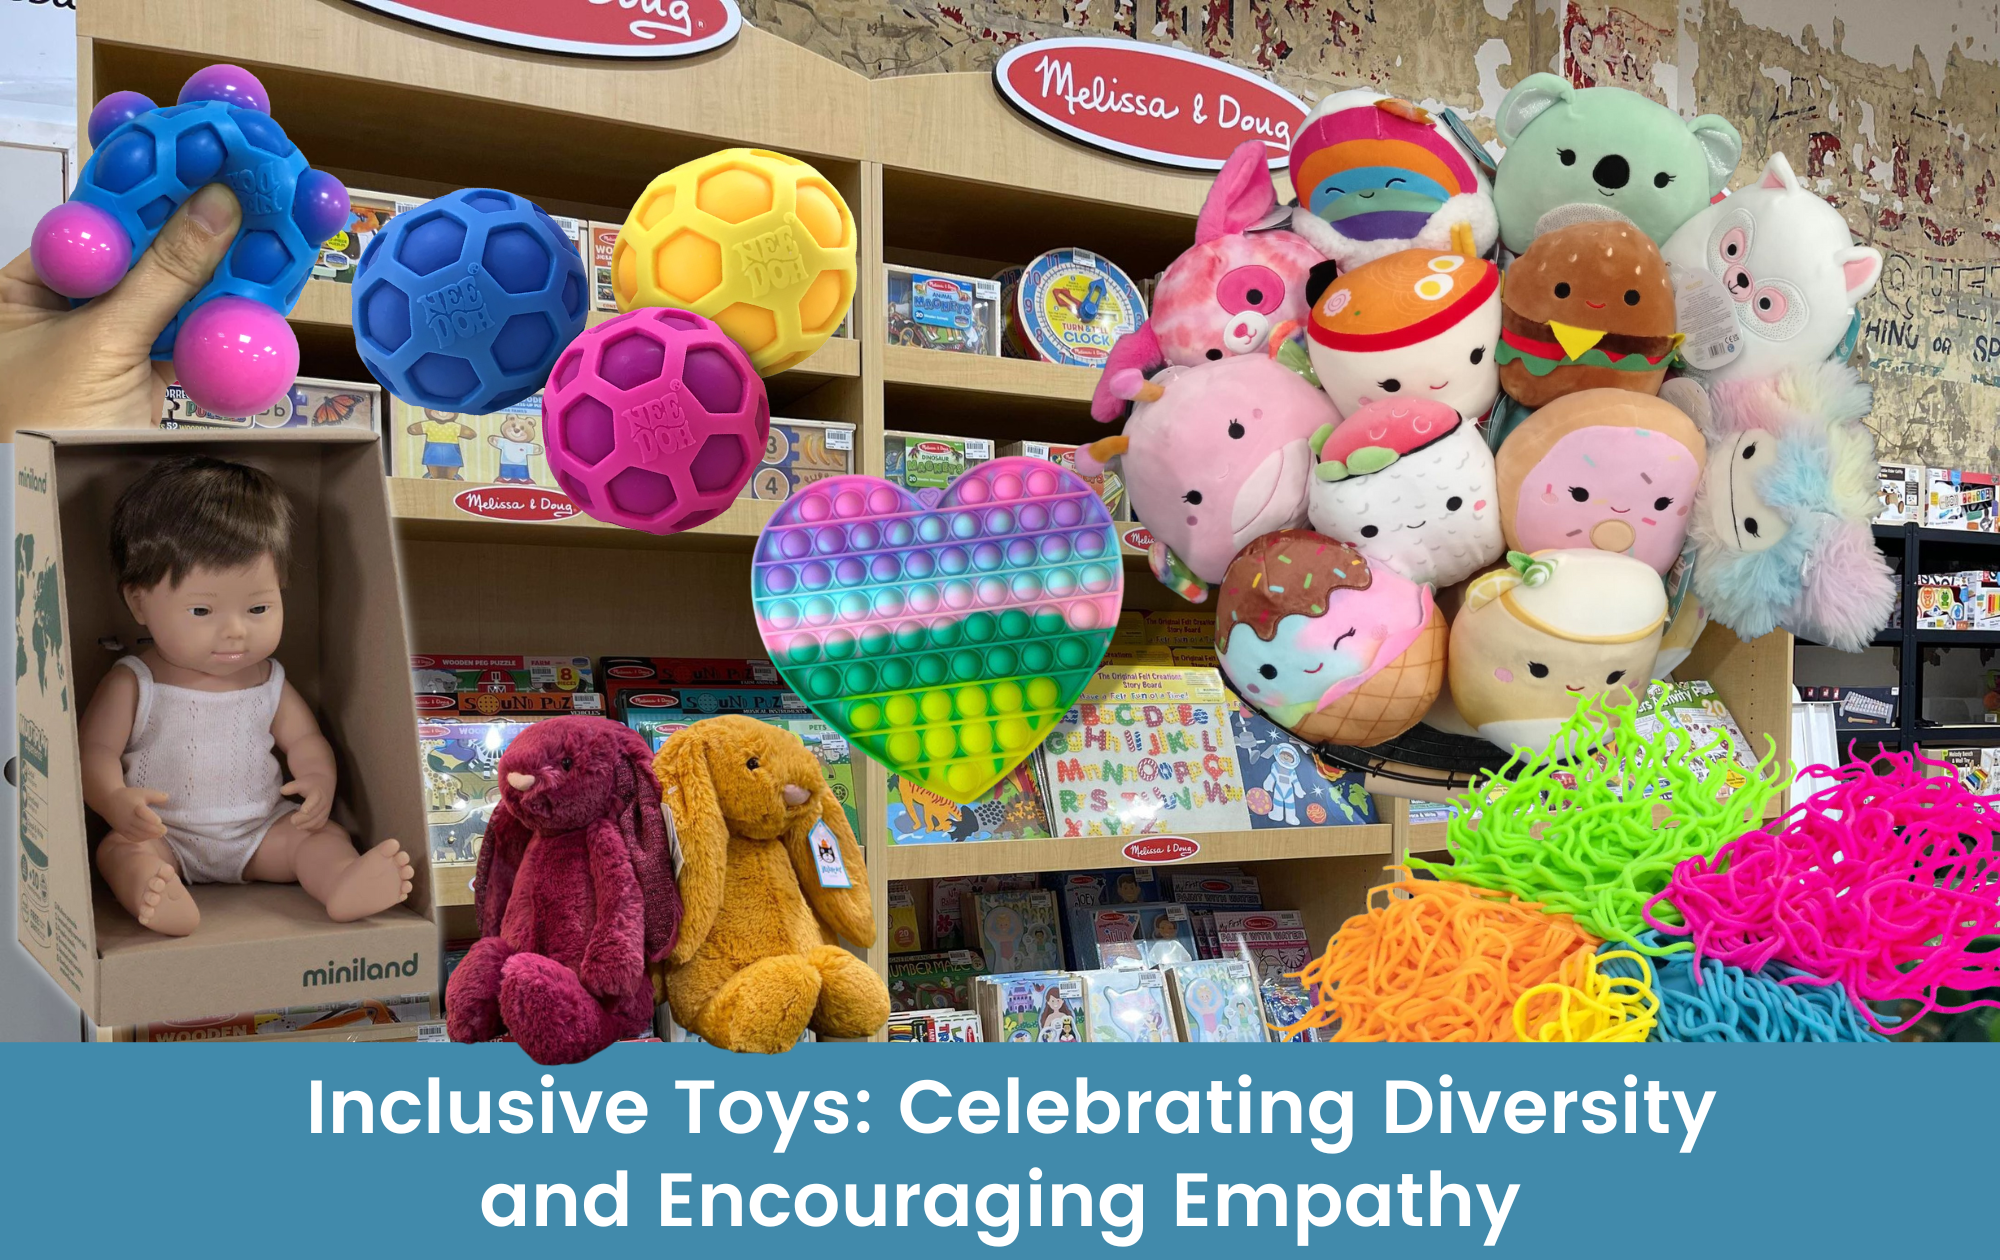 inclusive and diversity play and toys for cultural exploration through play